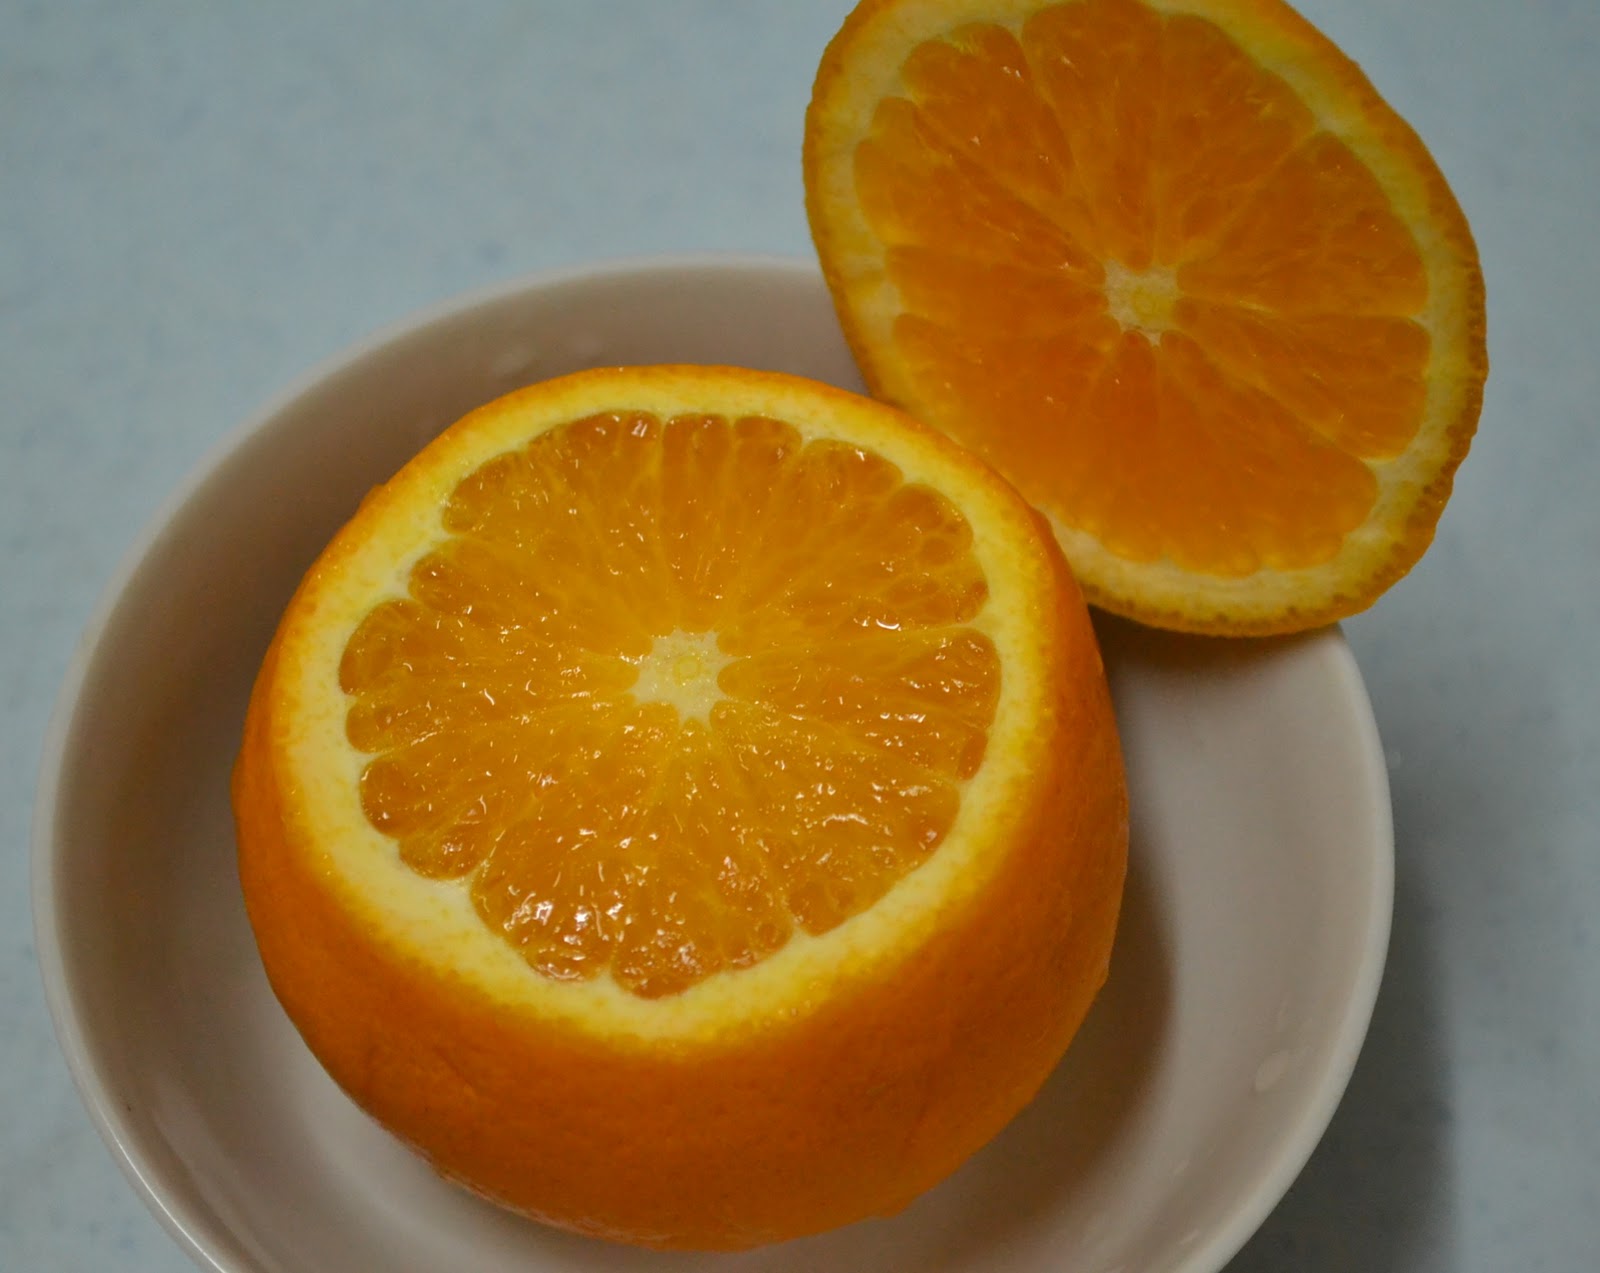 Food@Home Sweet Home: Effective Home Remedy for Cough = Steam Orange